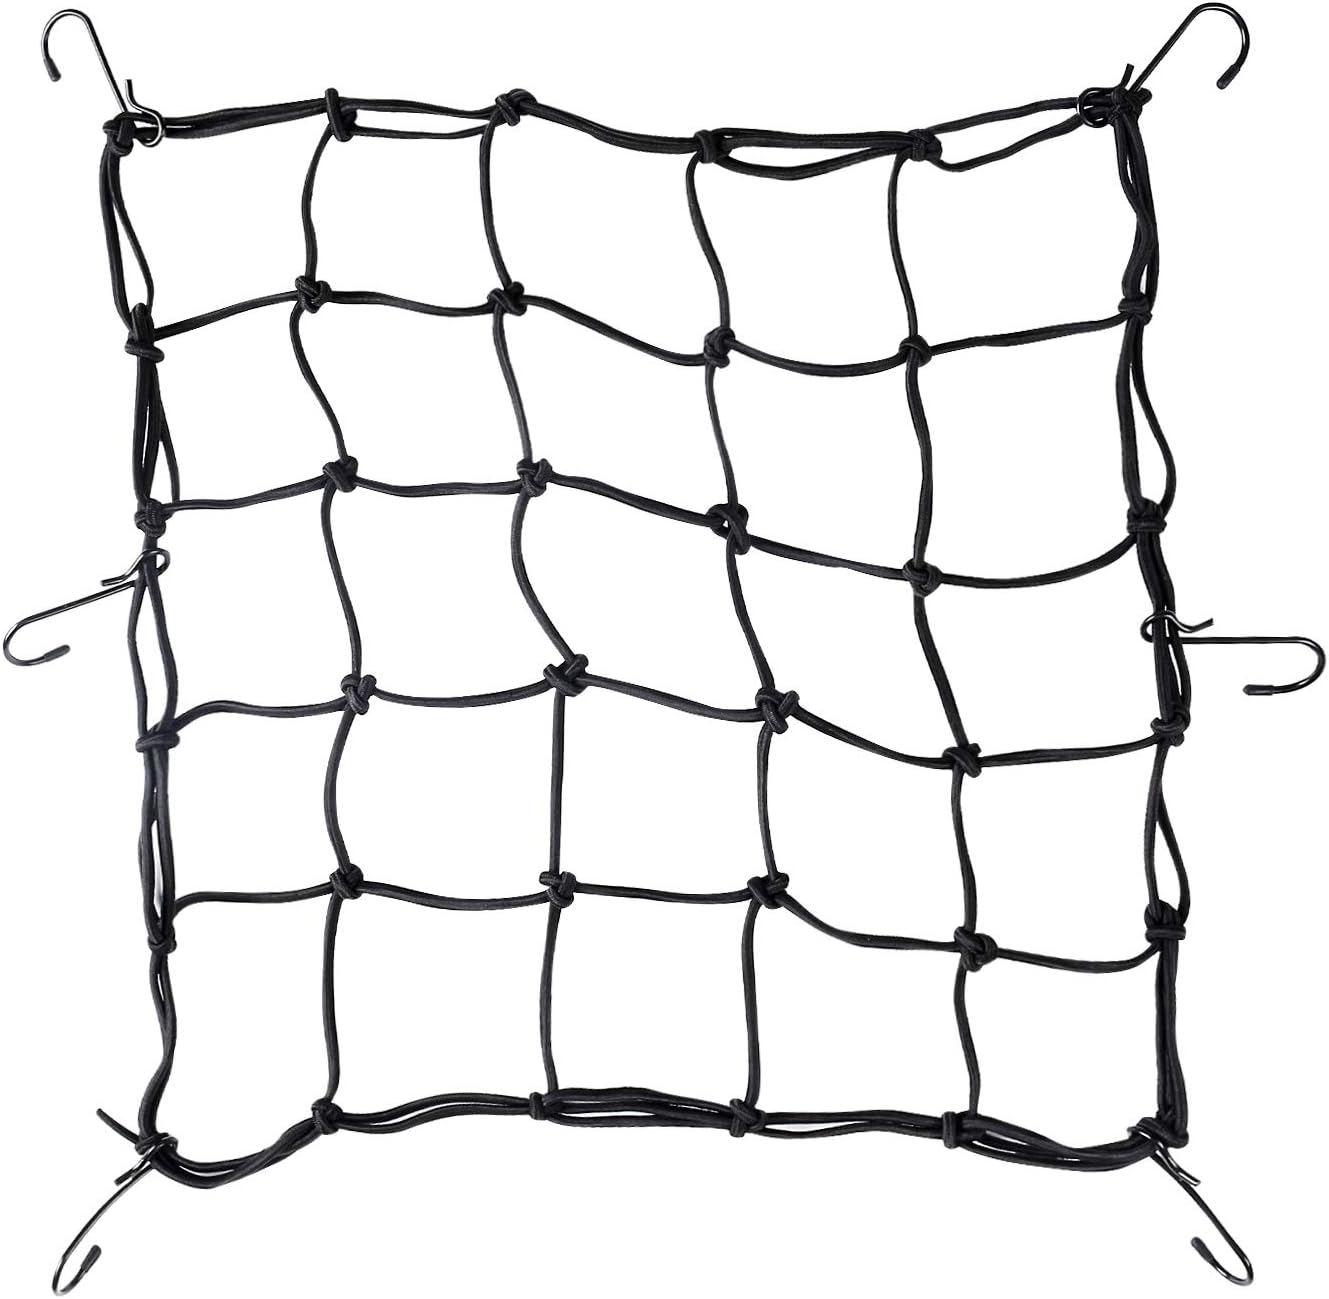 SunFounder Cargo Net for Motorcycle and ATV